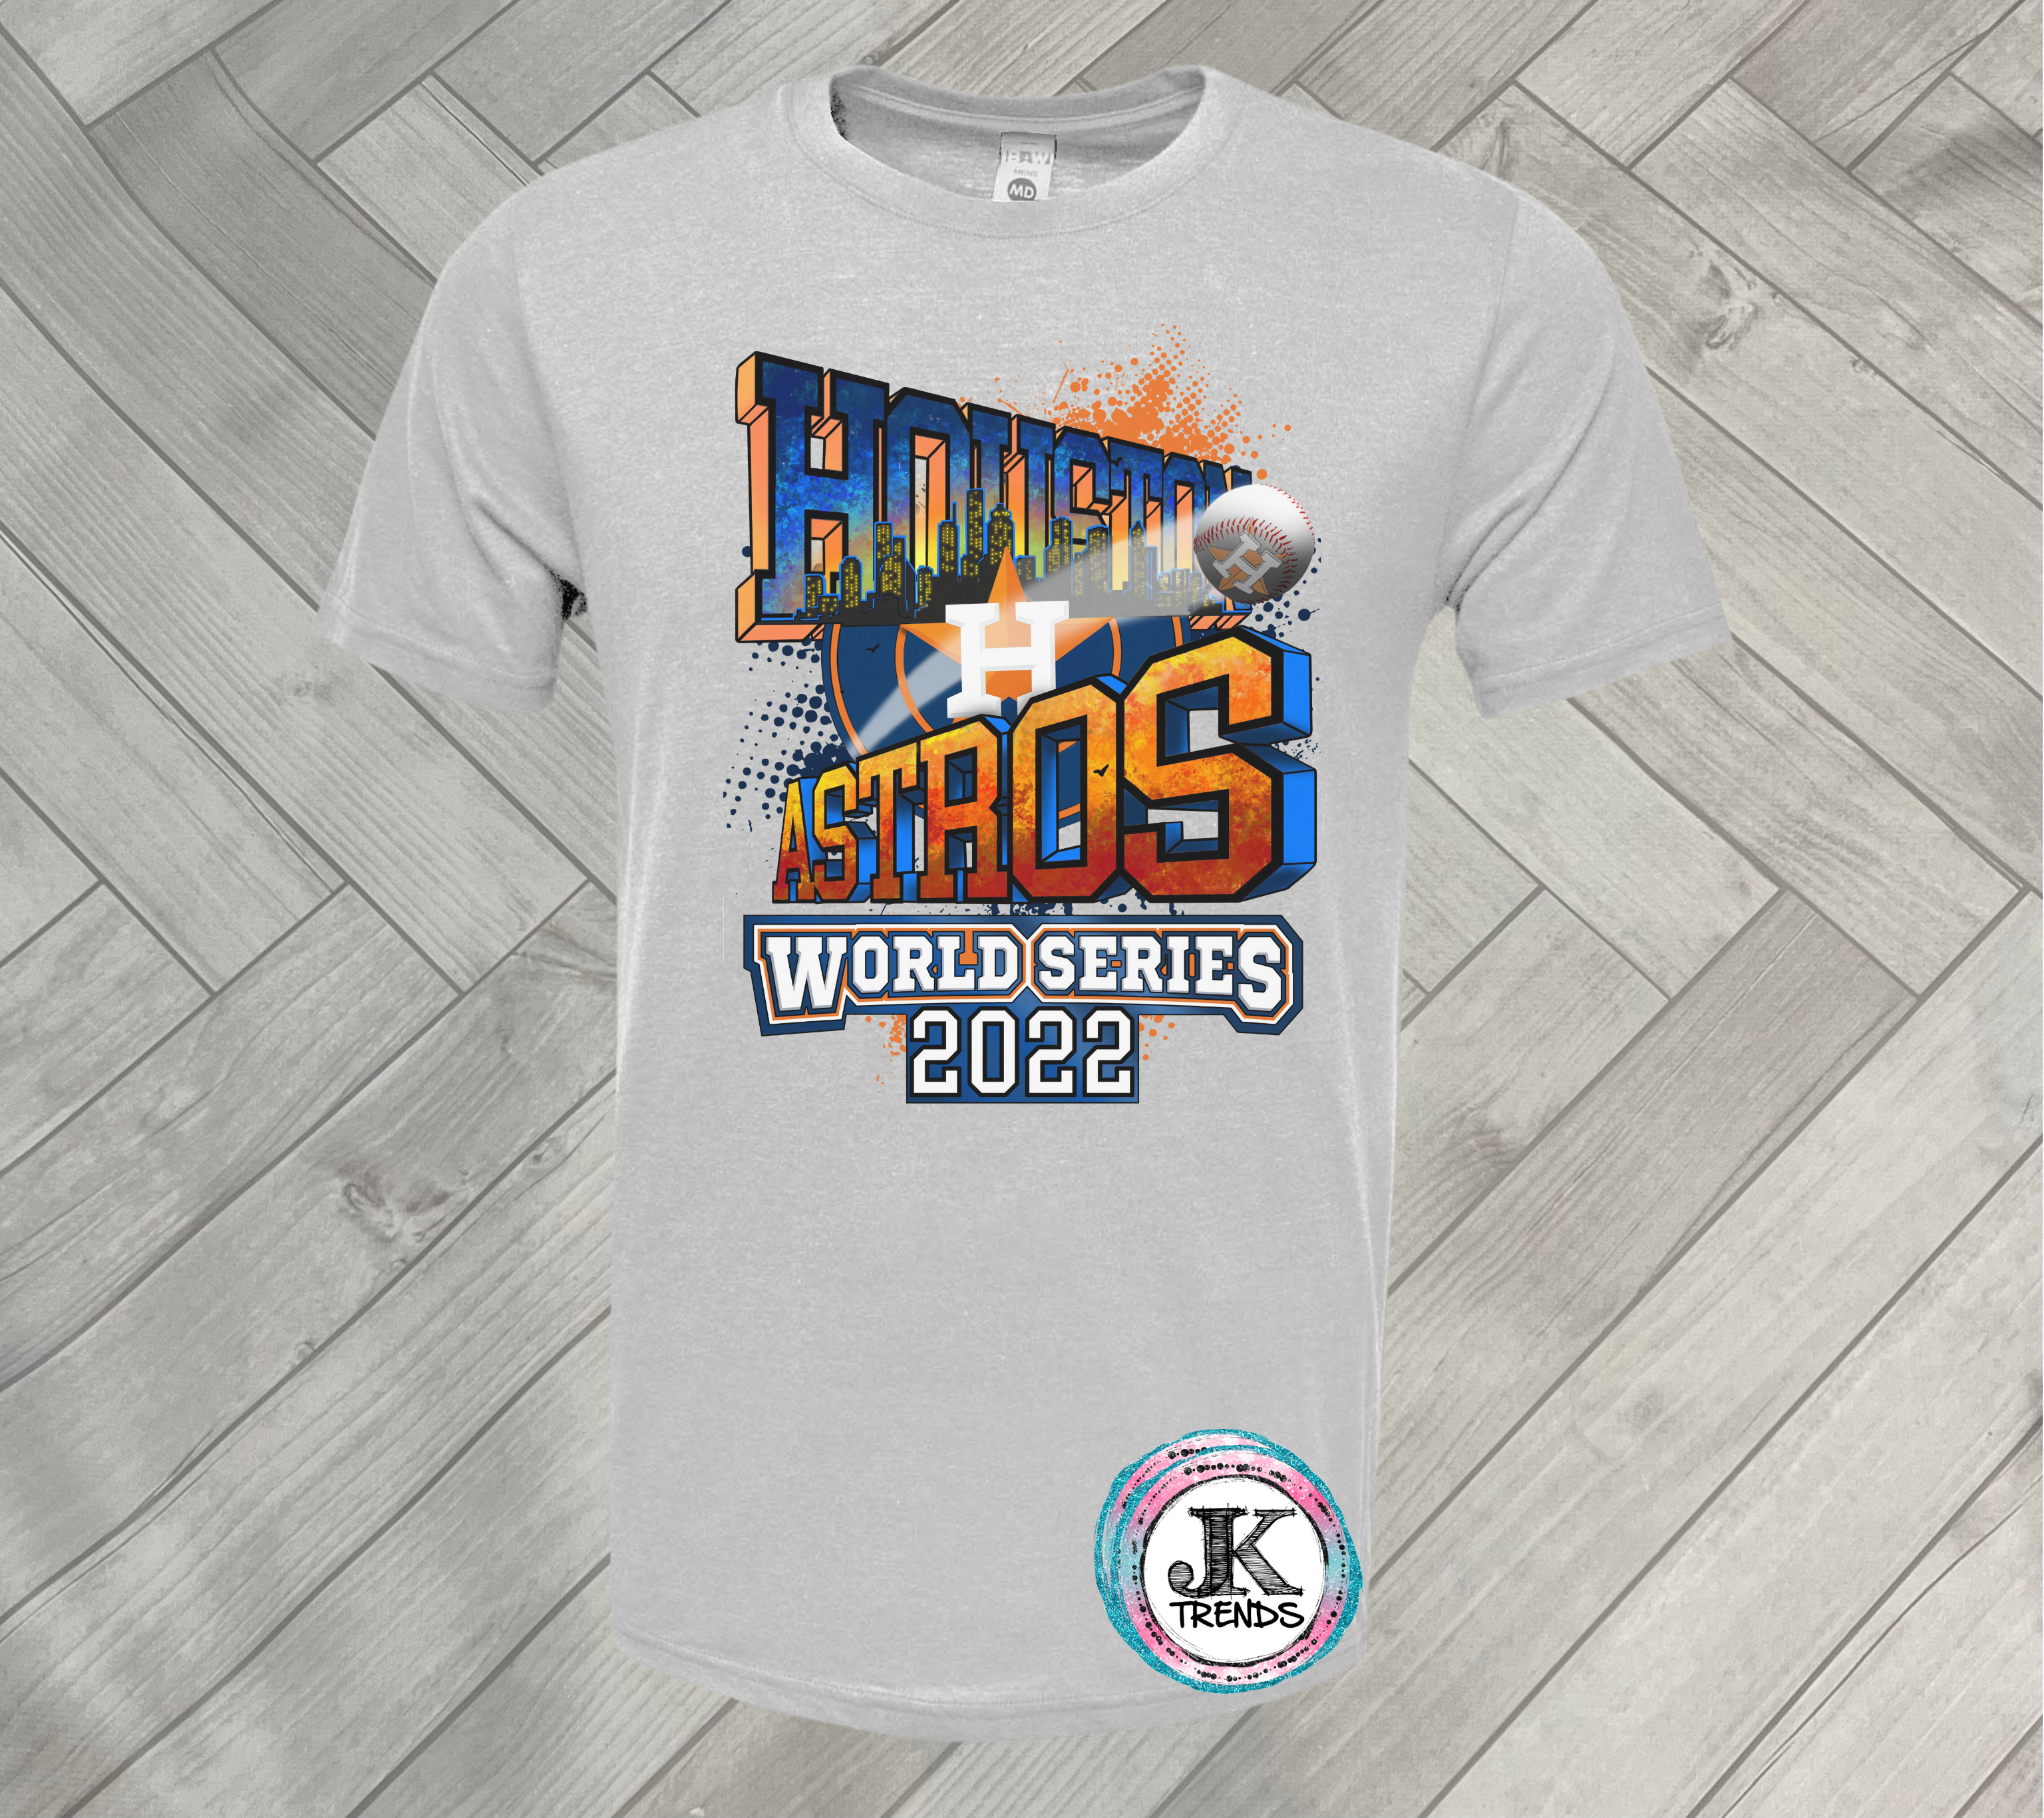 JK Trends Houston We Have World Series Champions 2022 Astros Astronaut Short Sleeved Shirt Youth Small / Platinum (Really Light Gray)